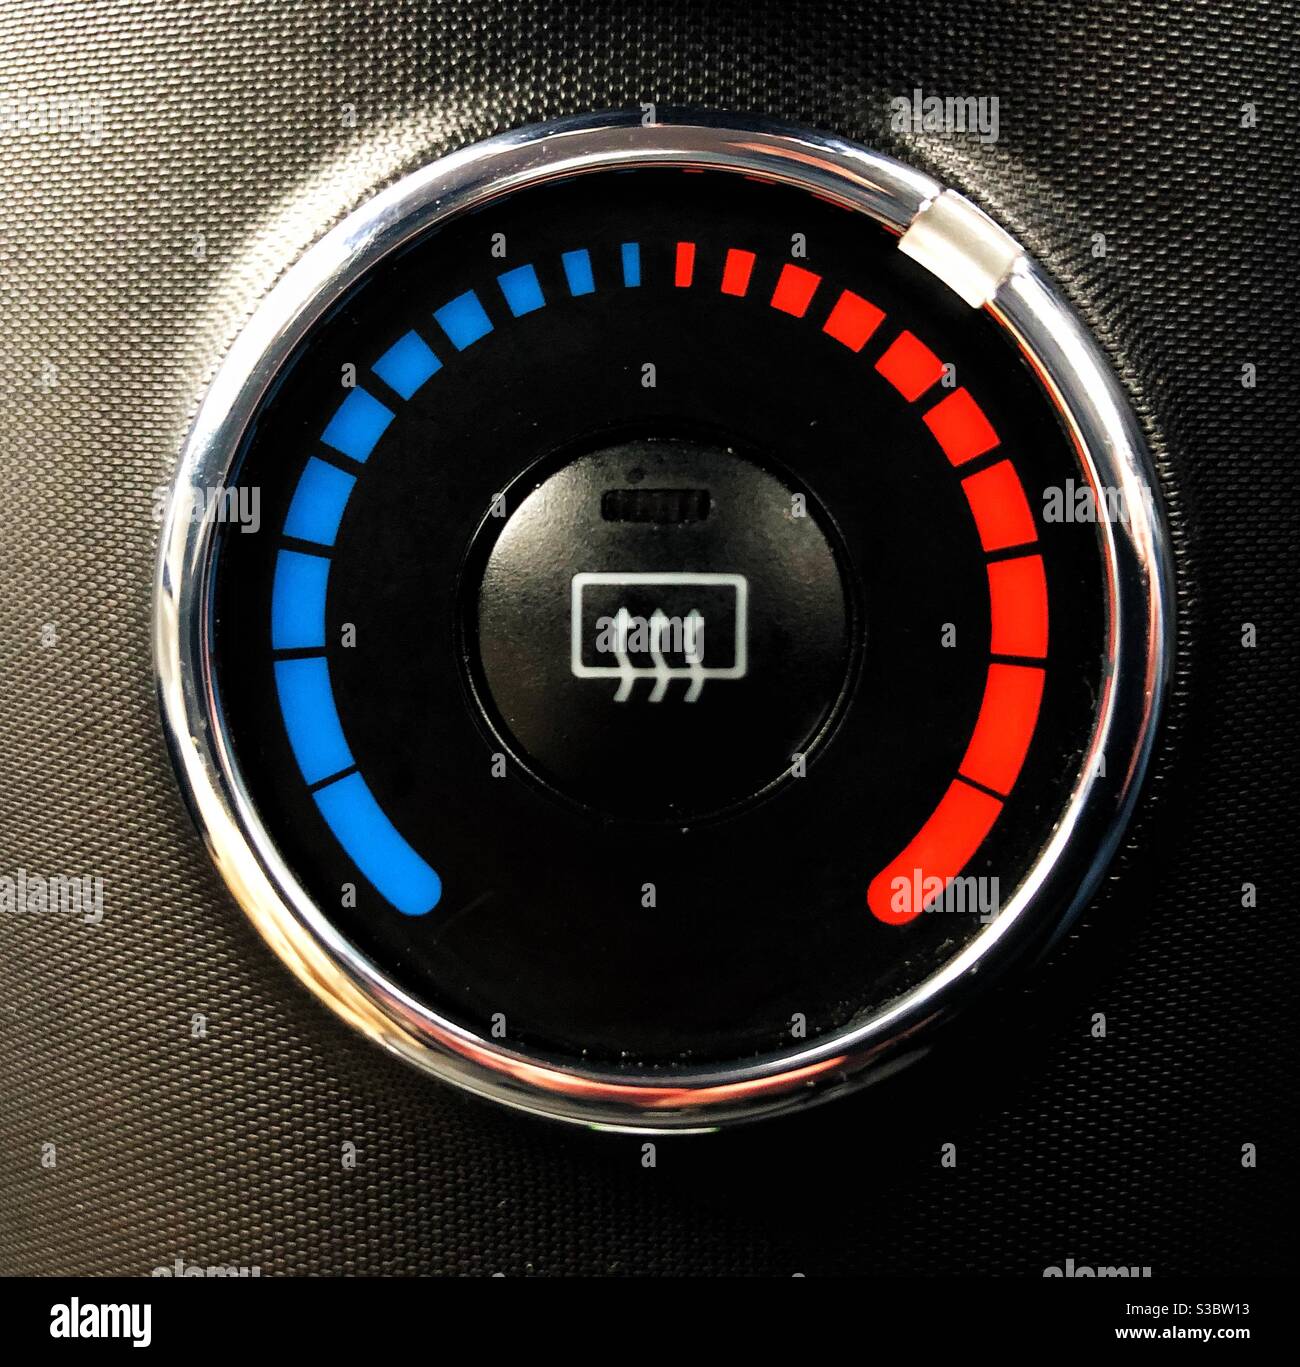 A temperature or heat gauge and control in a car Stock Photo